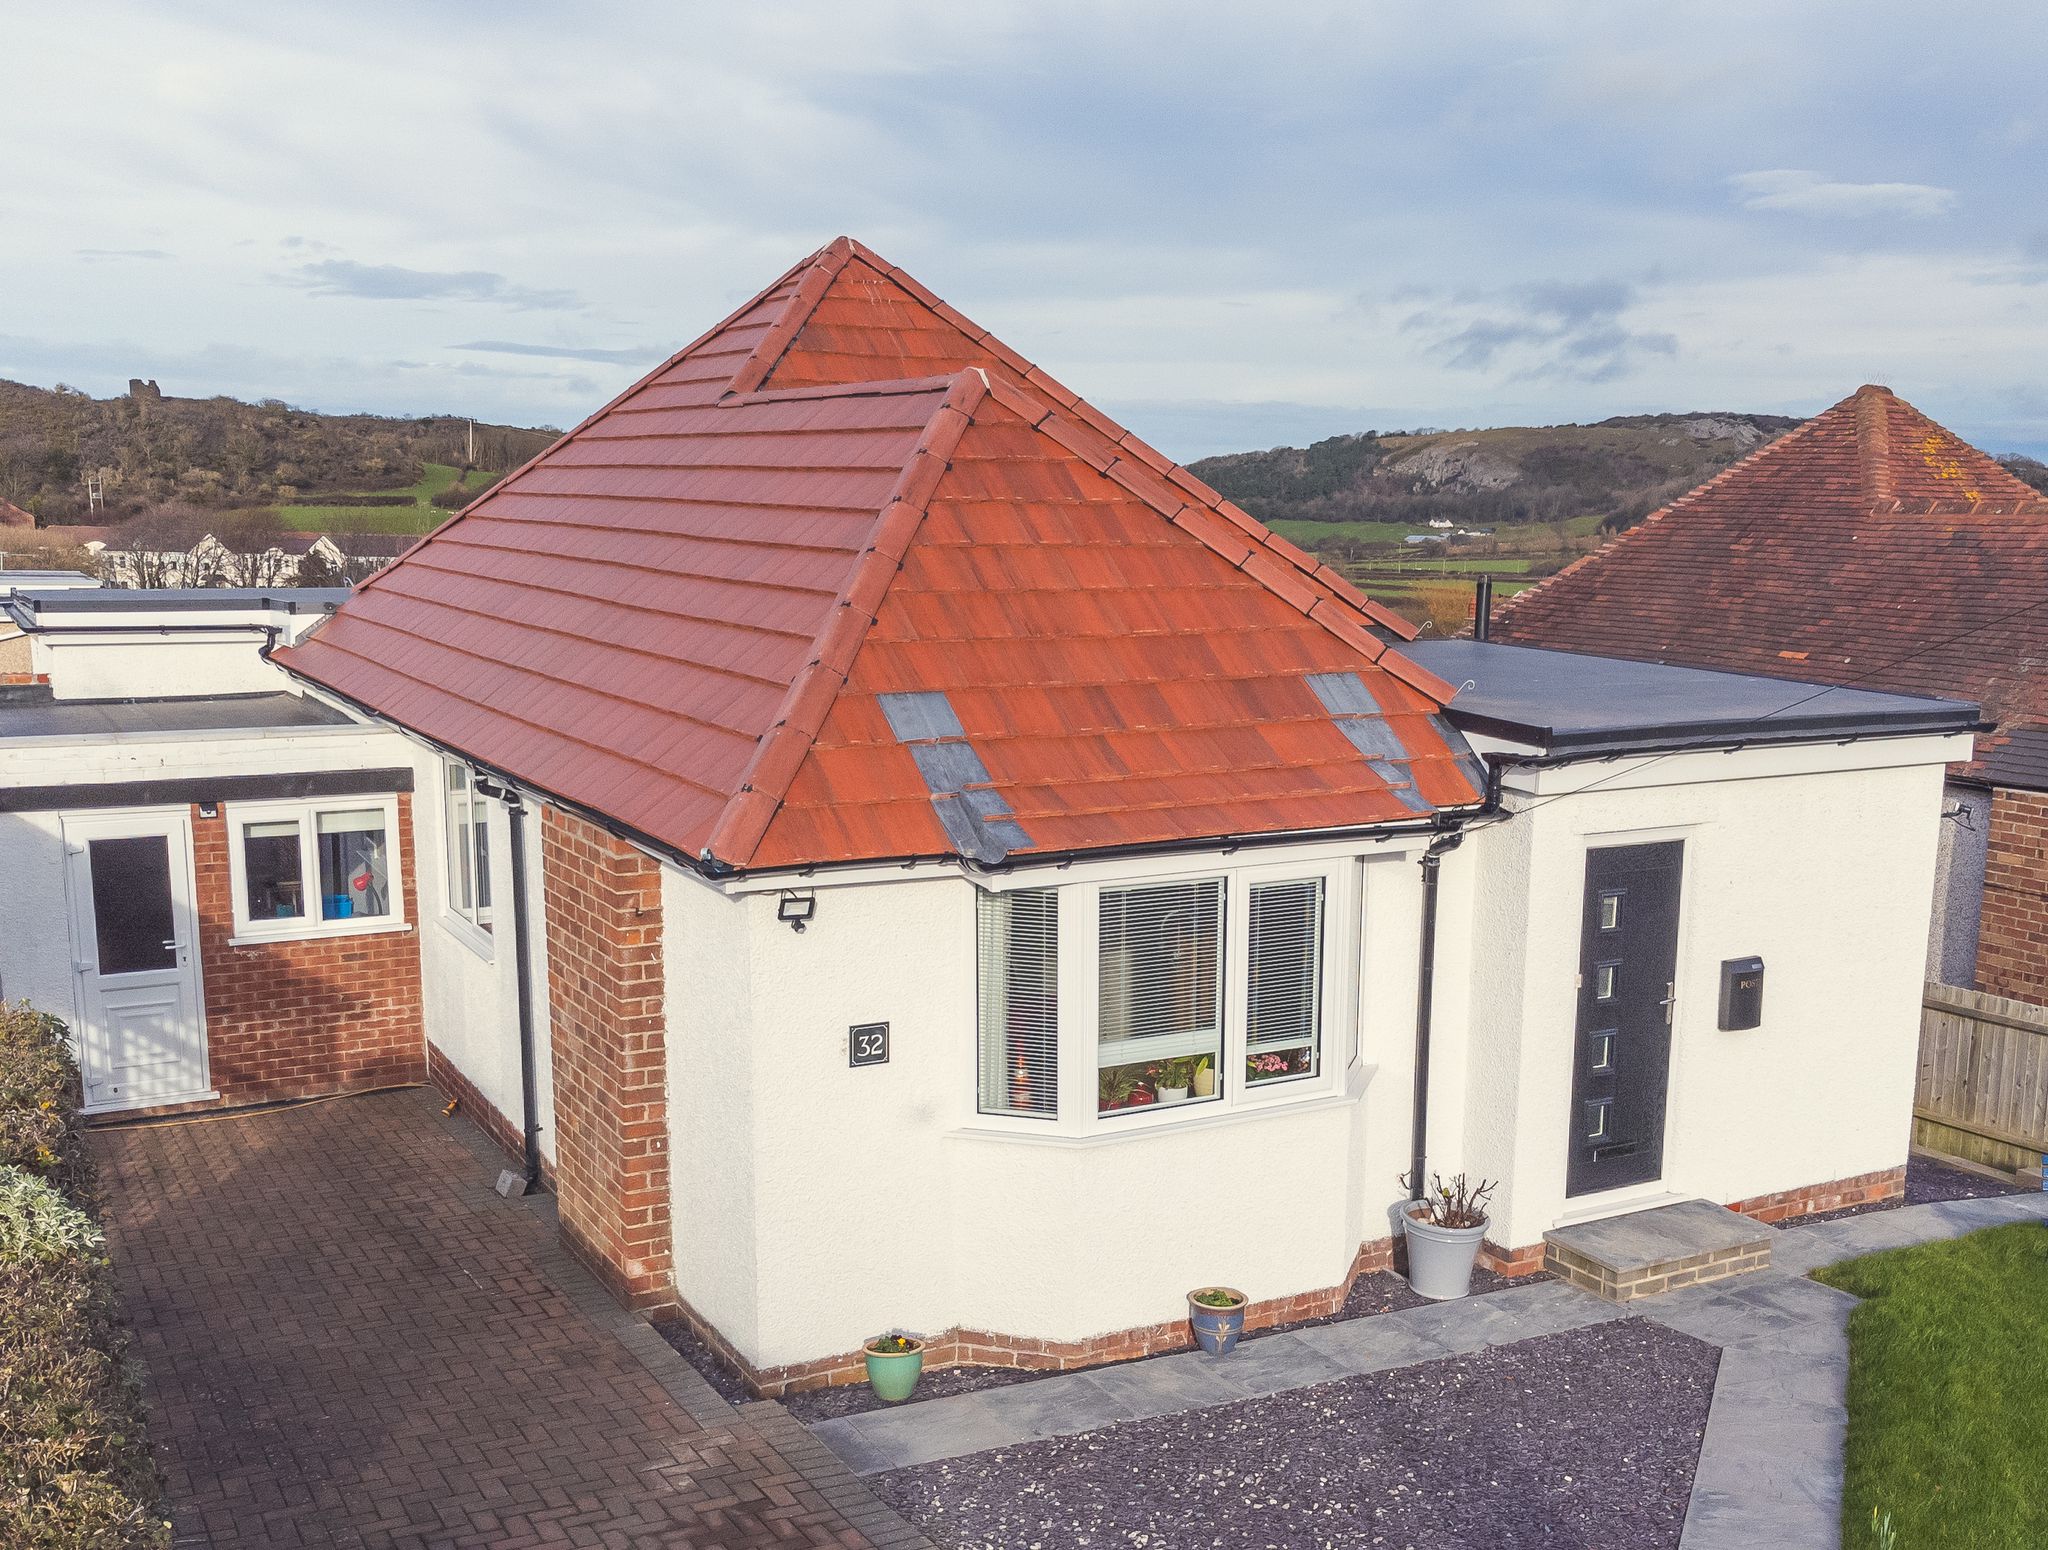 Tile Roof Contractors Llanystumdwy, LL52 - DD Roofing